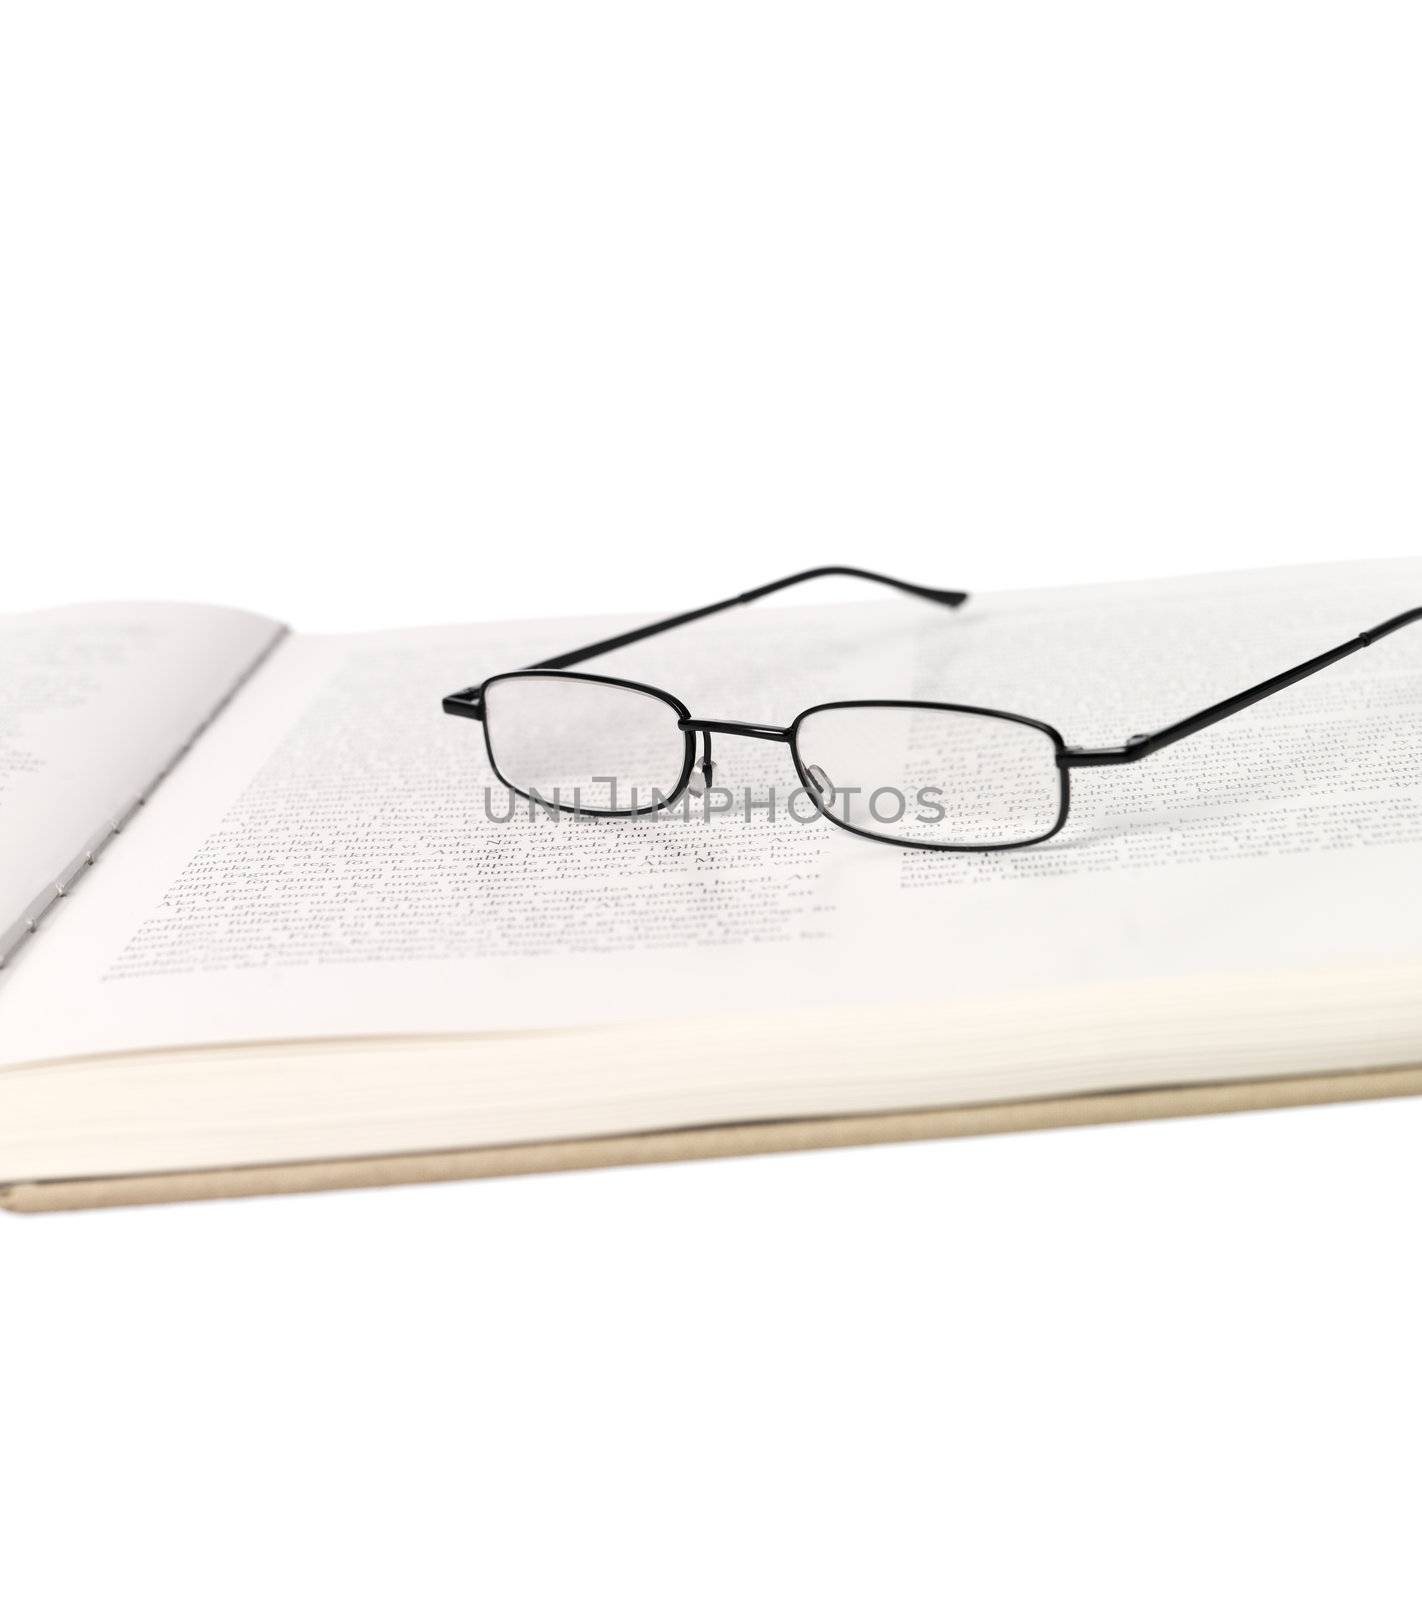 Reading-glasses in a spread book by gemenacom